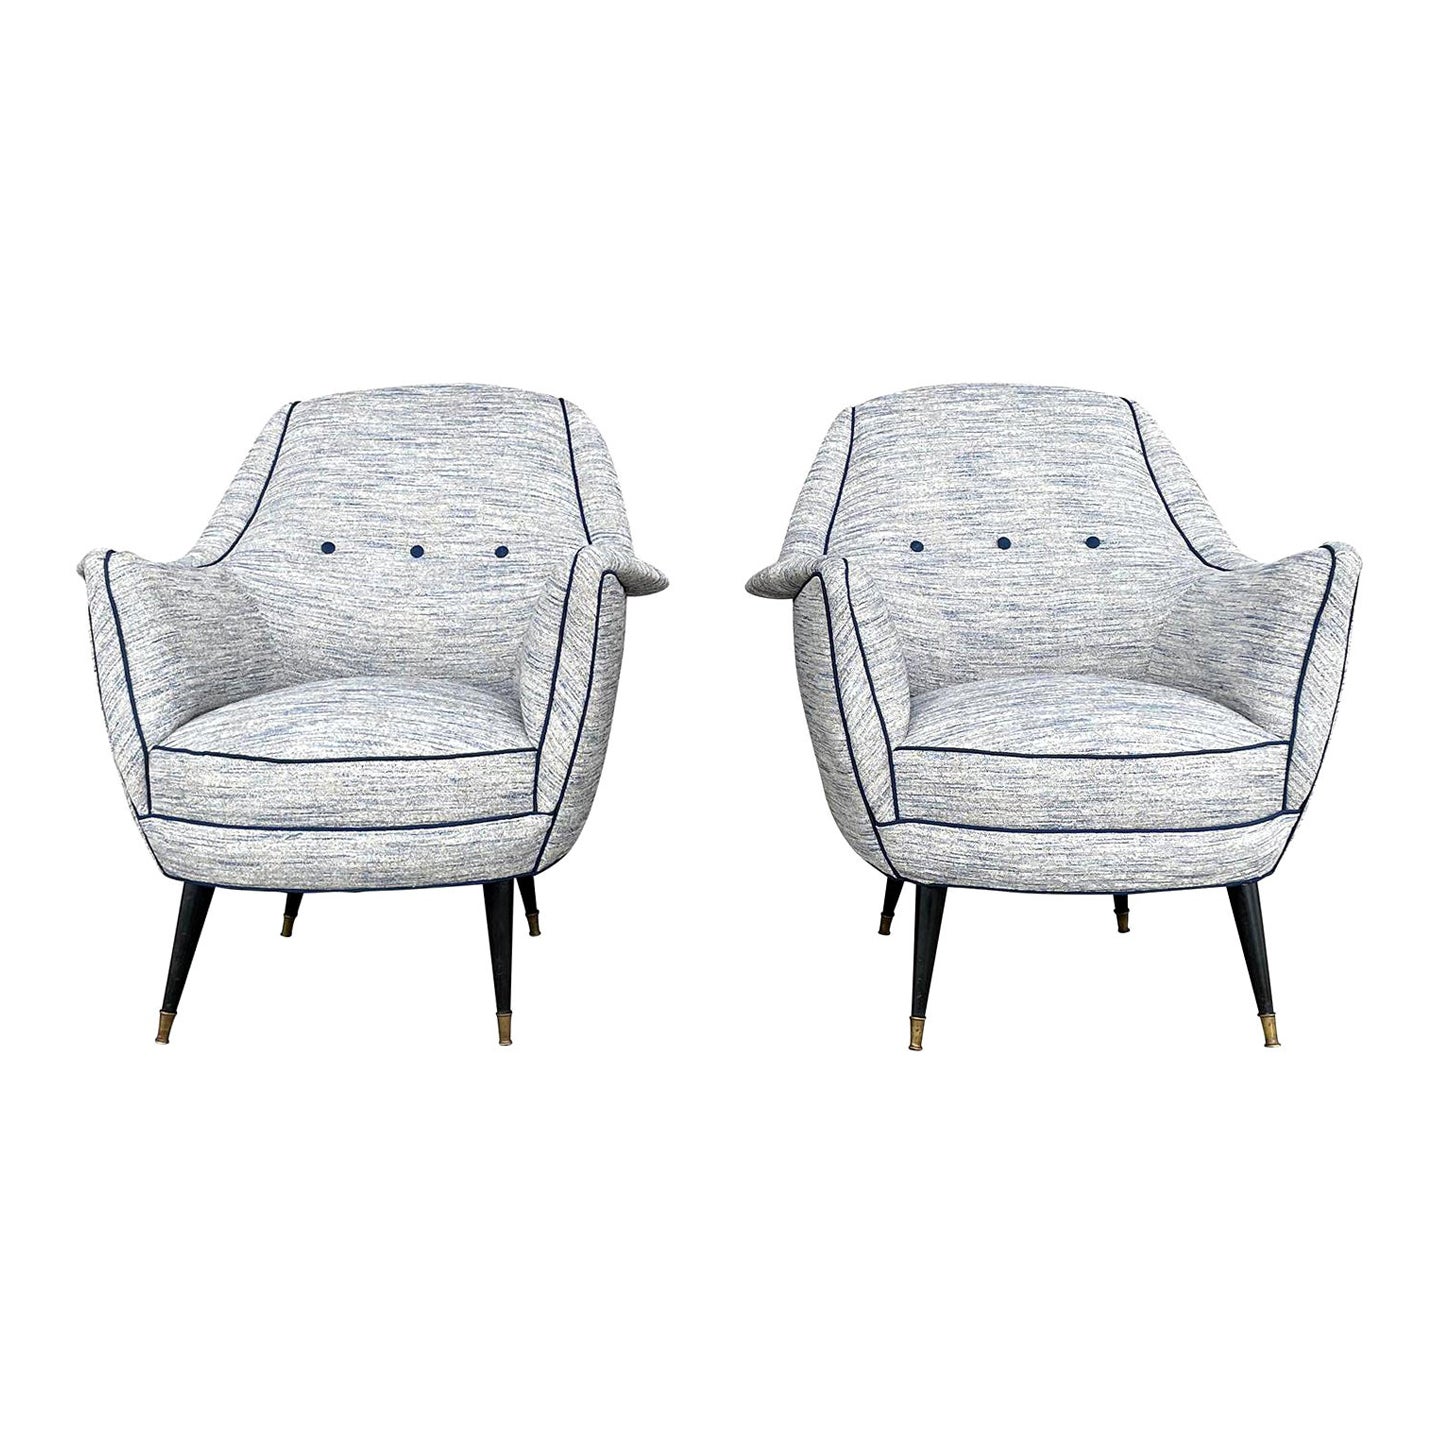 20th Century Light-Blue Italian Pair of Vintage Lounge Chairs by Ico Parisi